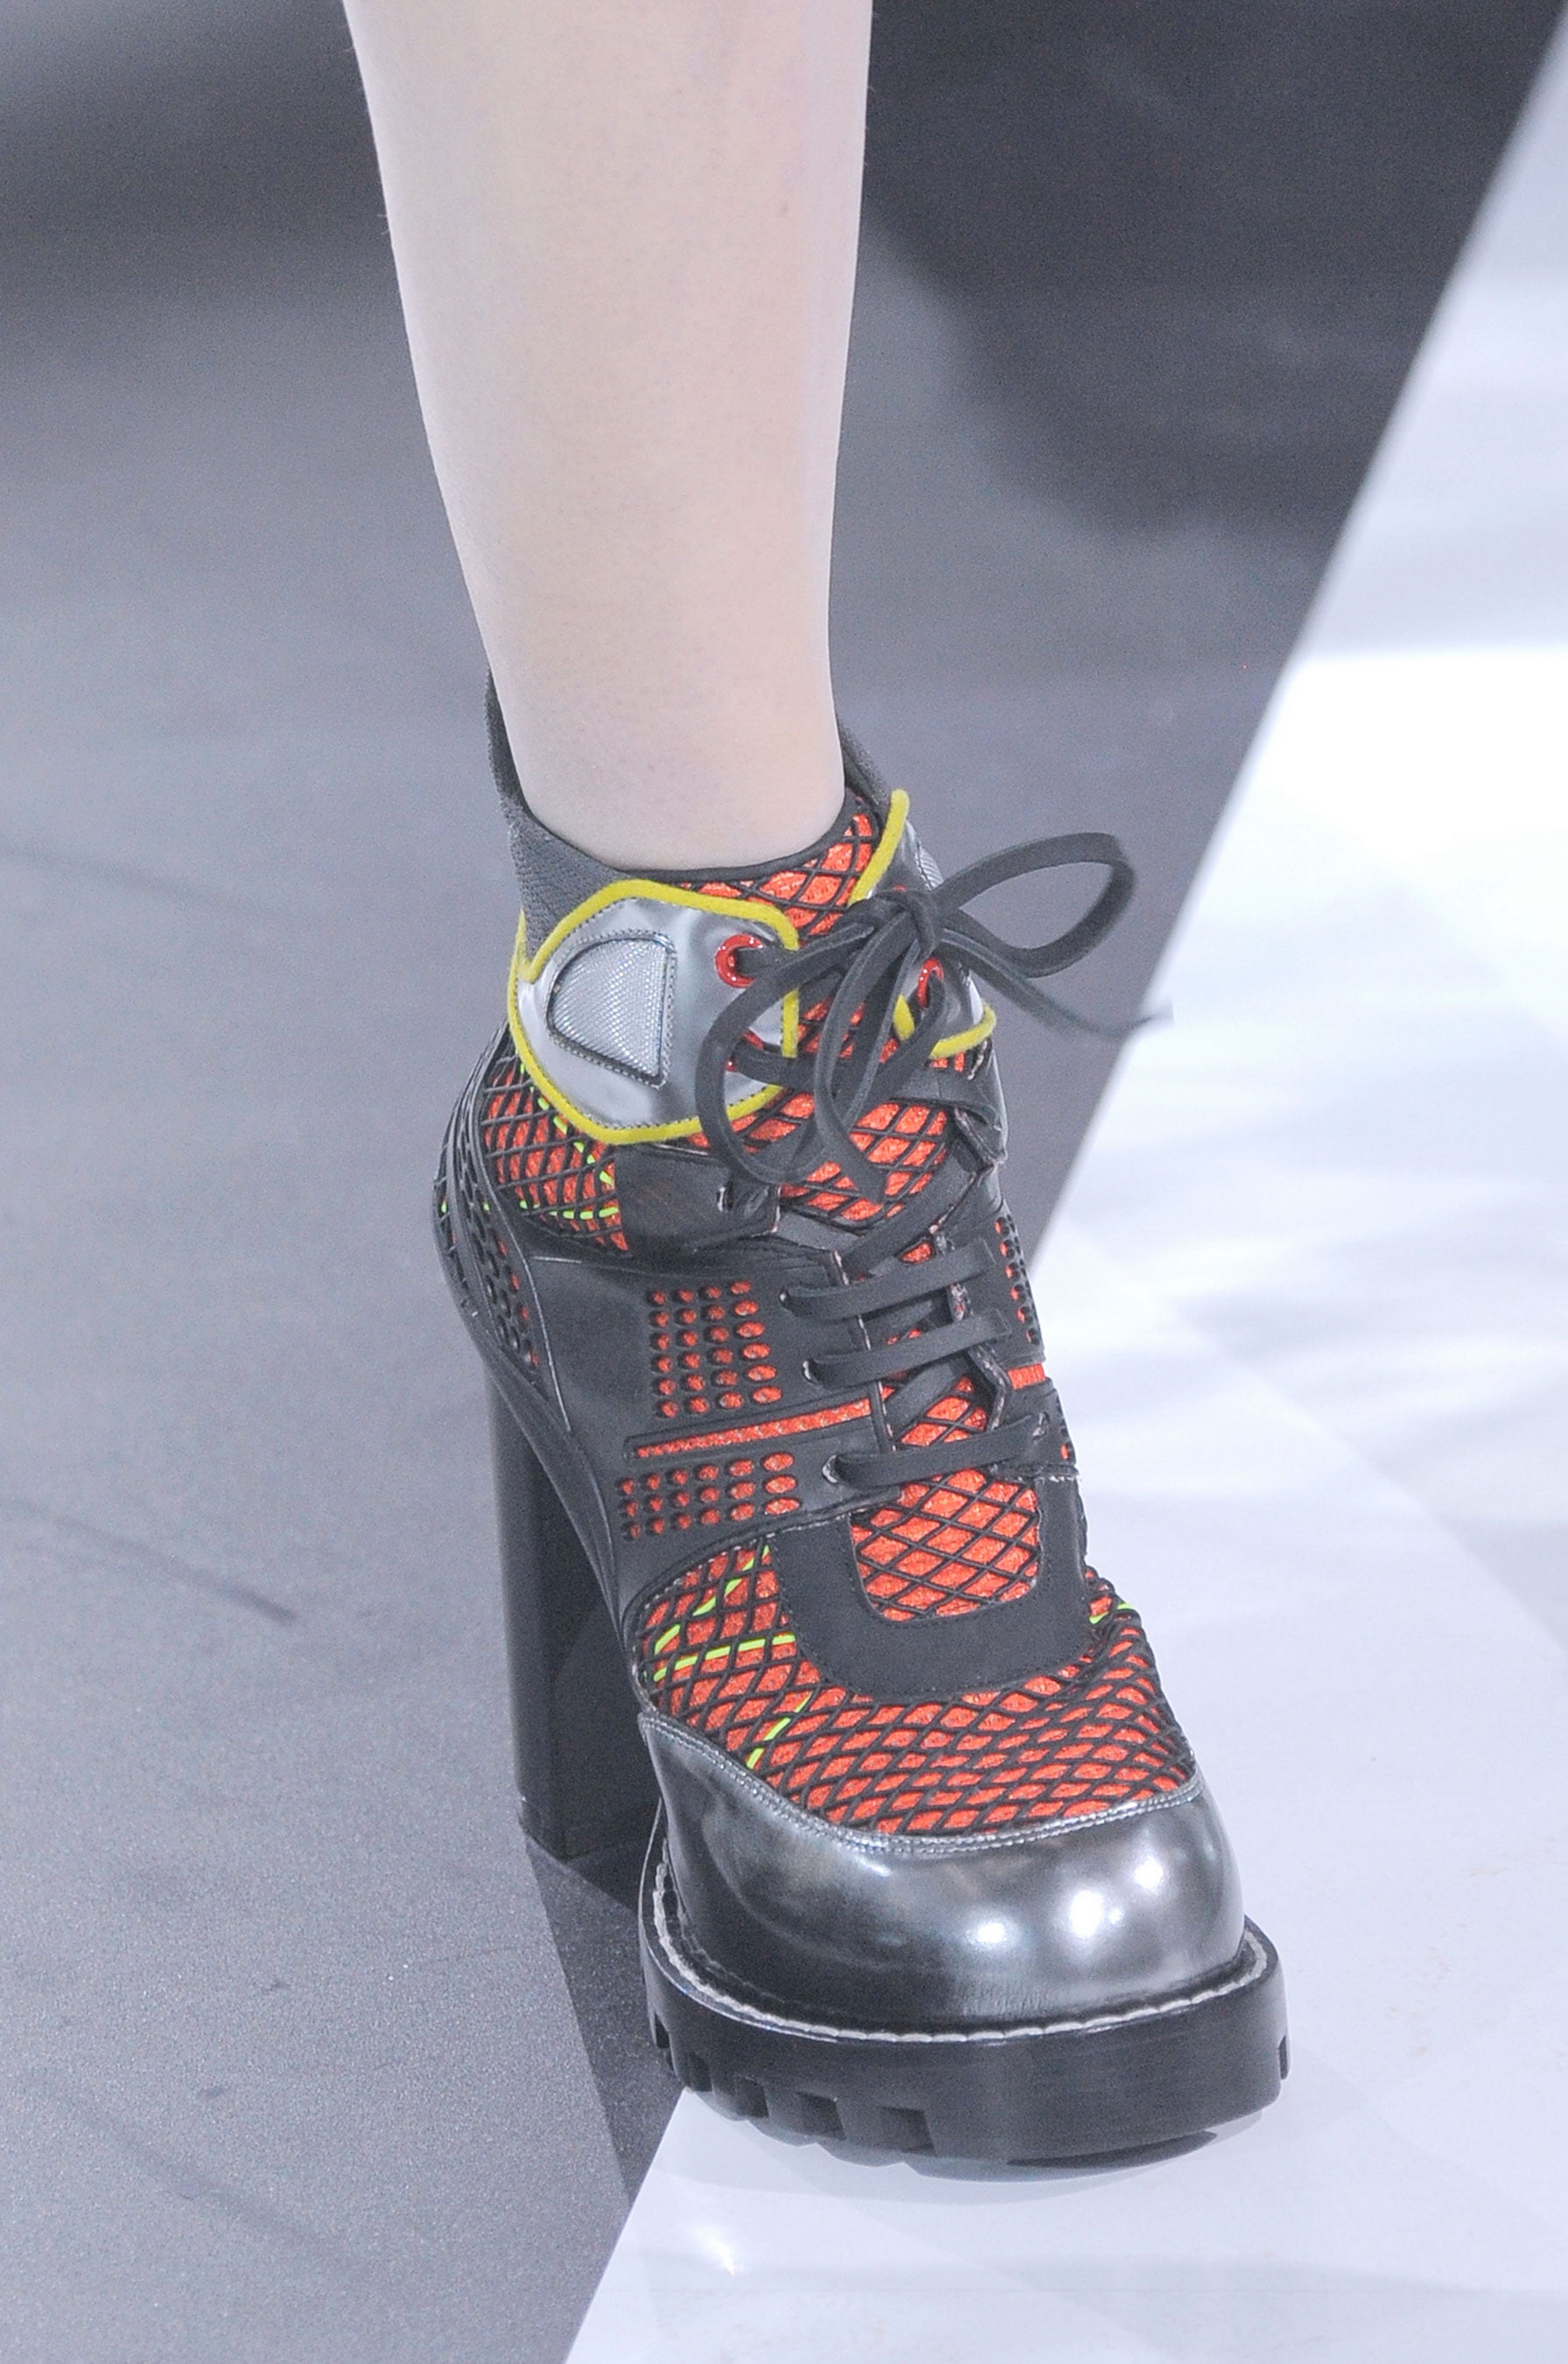 Louis Vuitton Fall 2016  Check Out the Latest Designer Shoes That